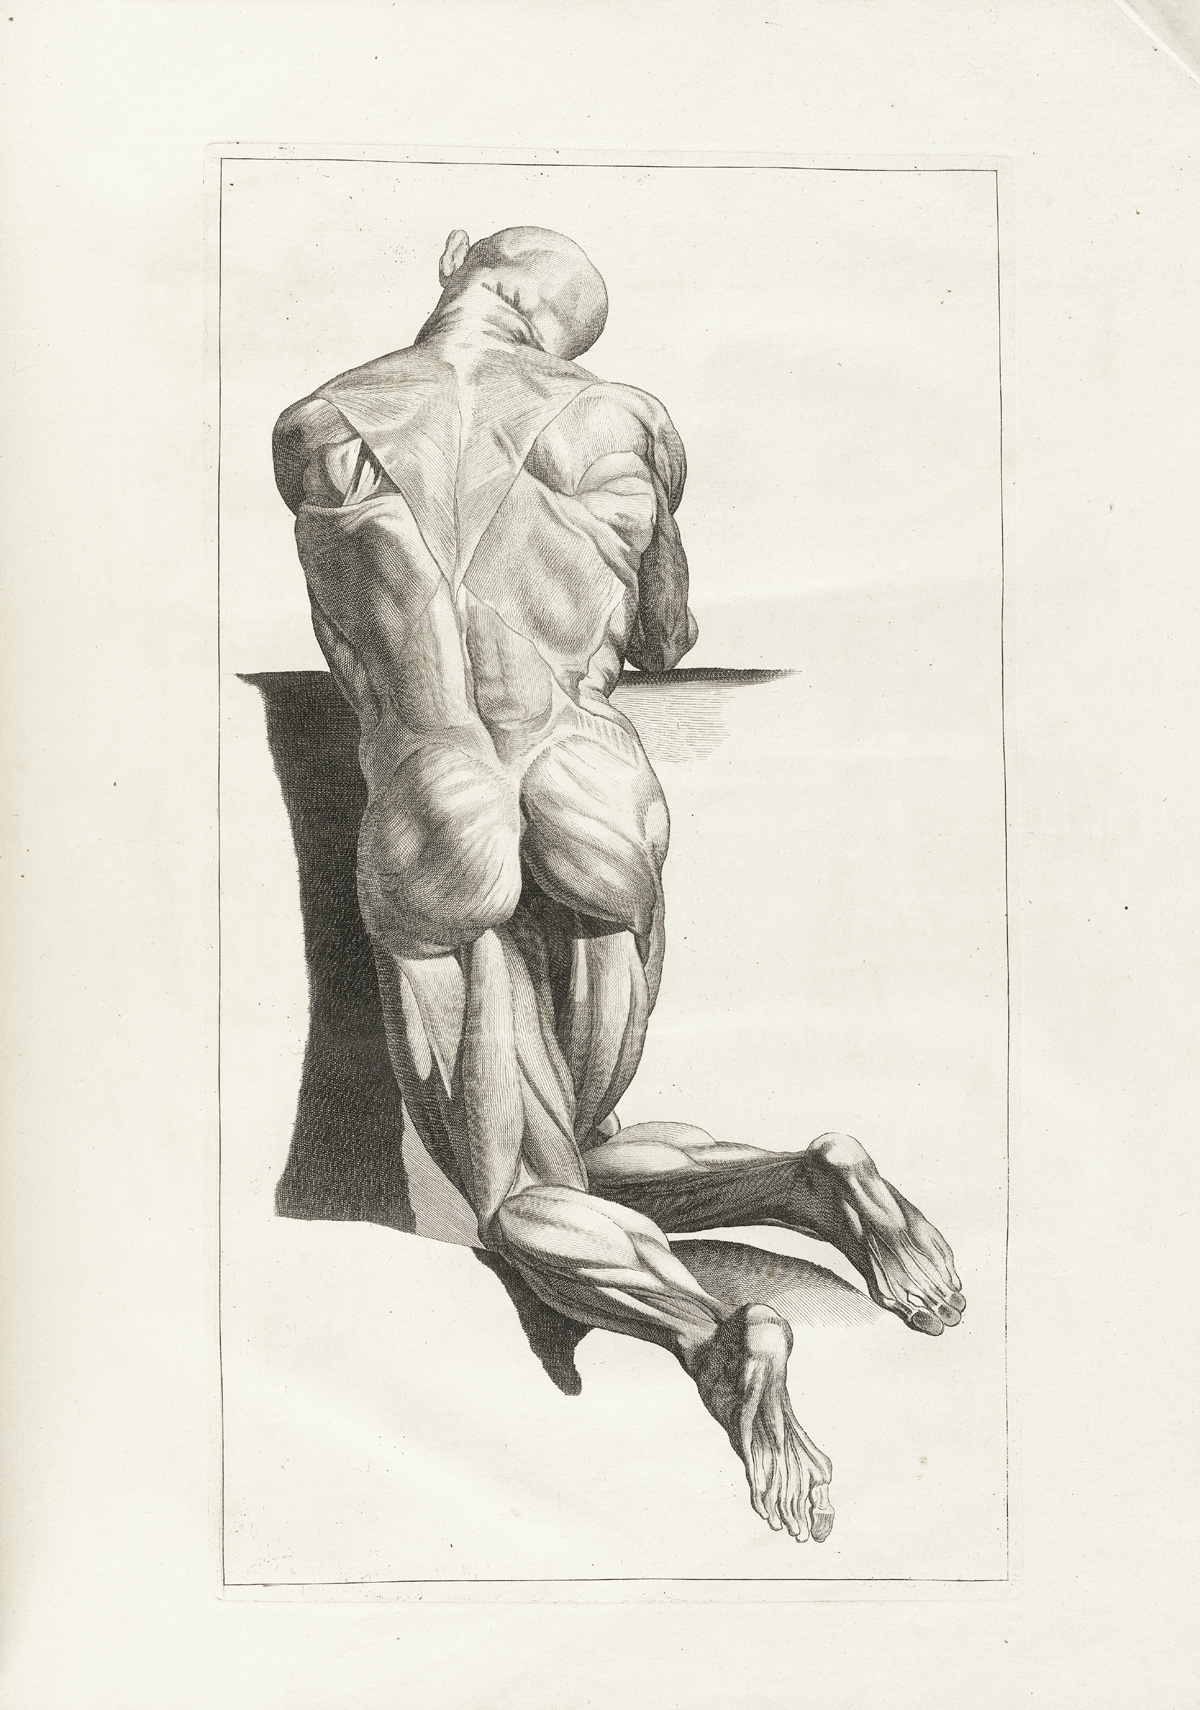 Engraving of a kneeling male muscle figure viewed from behind, showing the muscles of the back, buttocks, and legs, from Jacques Gamelin’s Nouveau recueil d’osteologie et de myologie, NLM Call no.: WZ 260 G178m 1779.